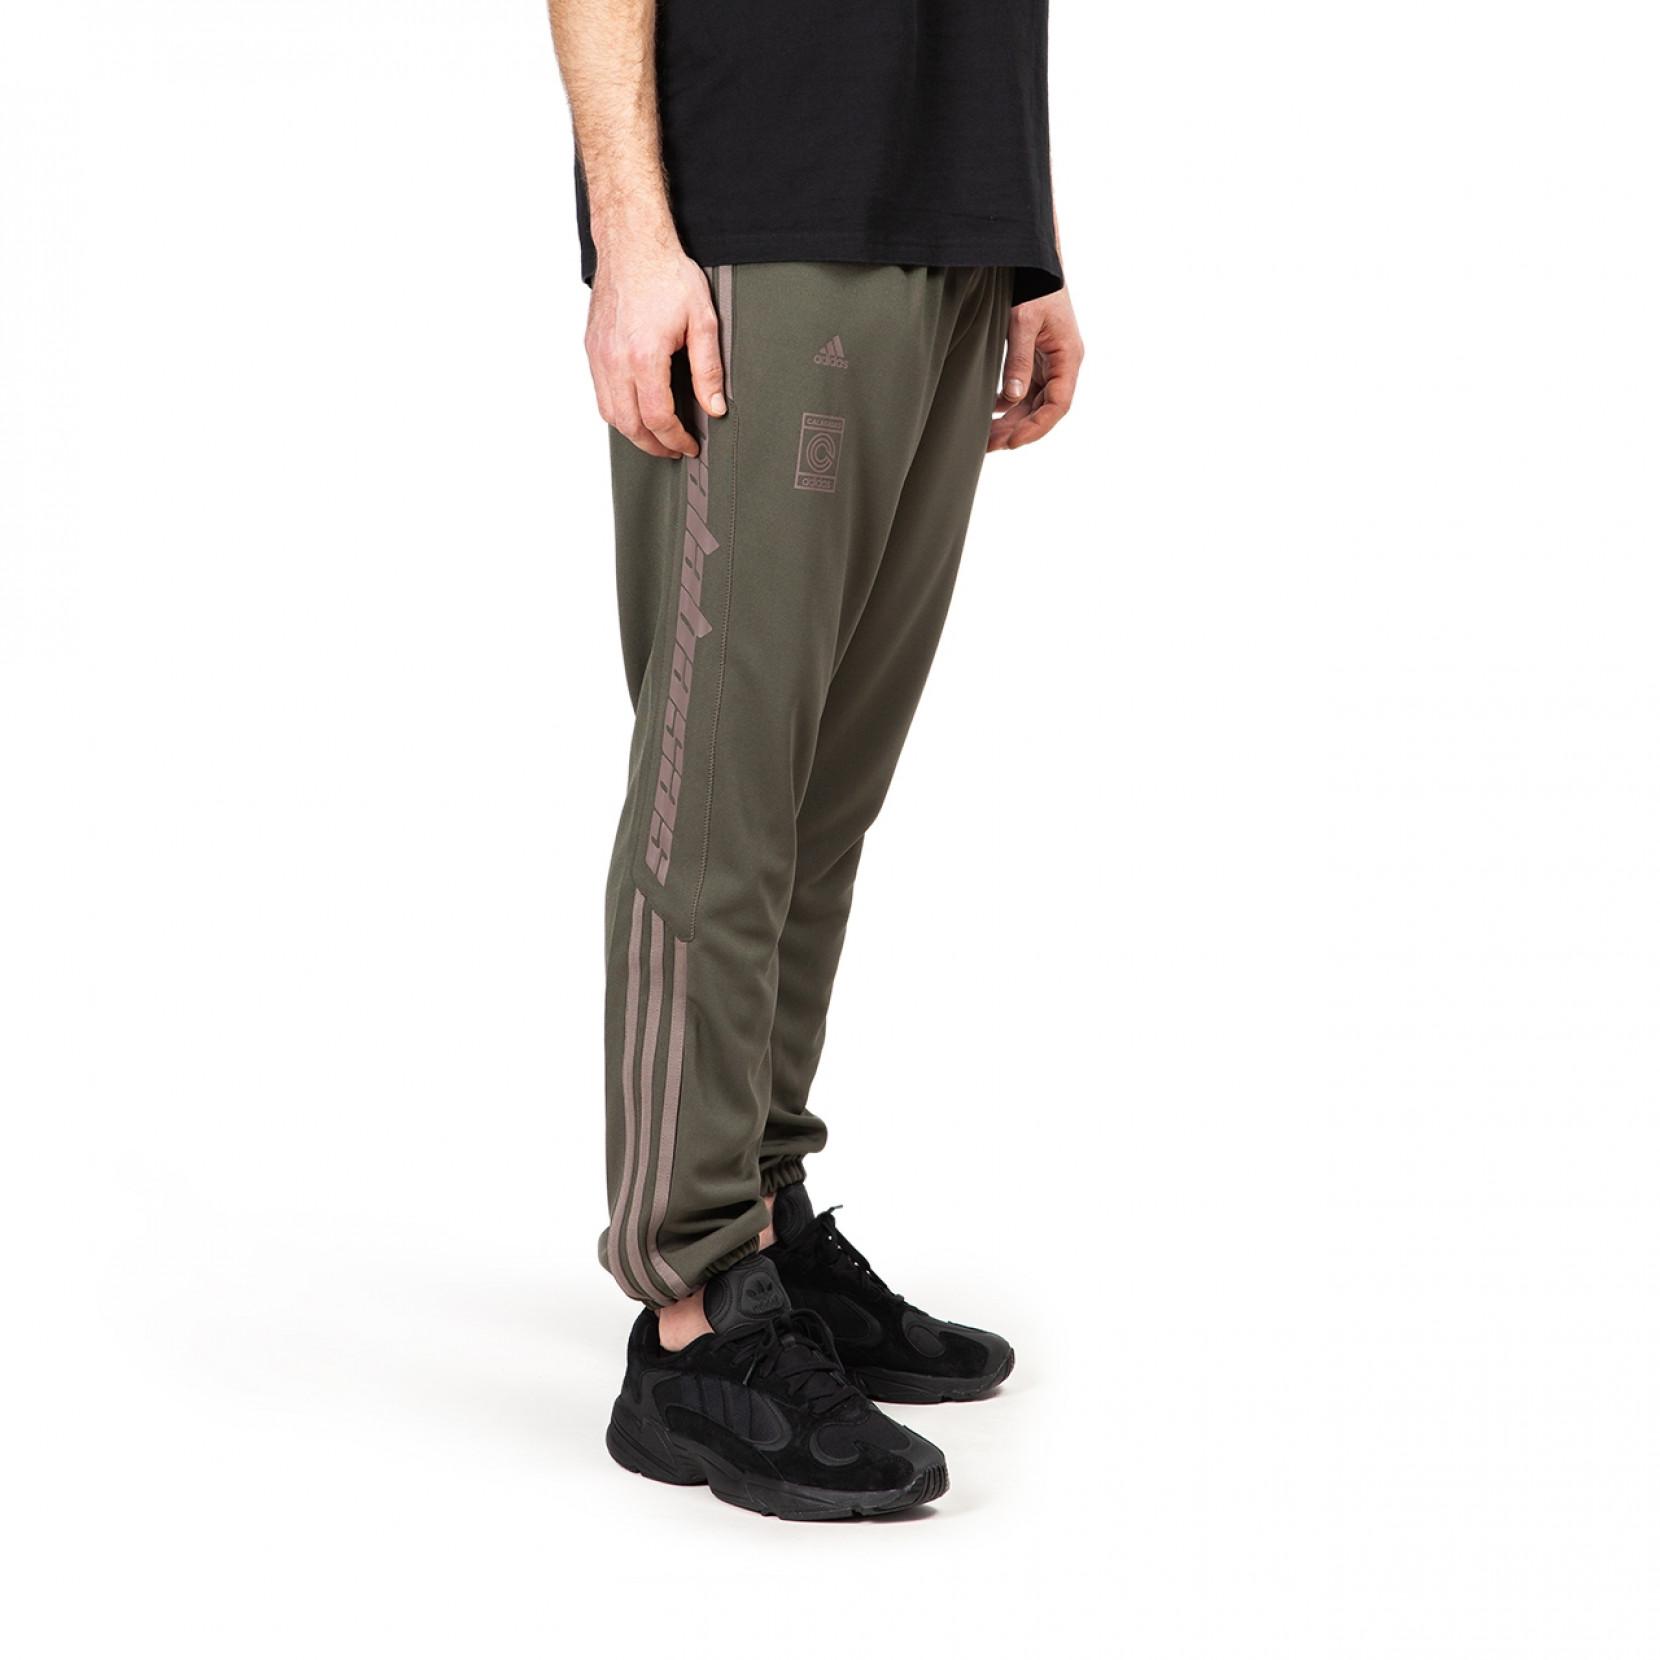 adidas Synthetic Yeezy Calabasas Track Pant in Olive (Green) for Men - Lyst